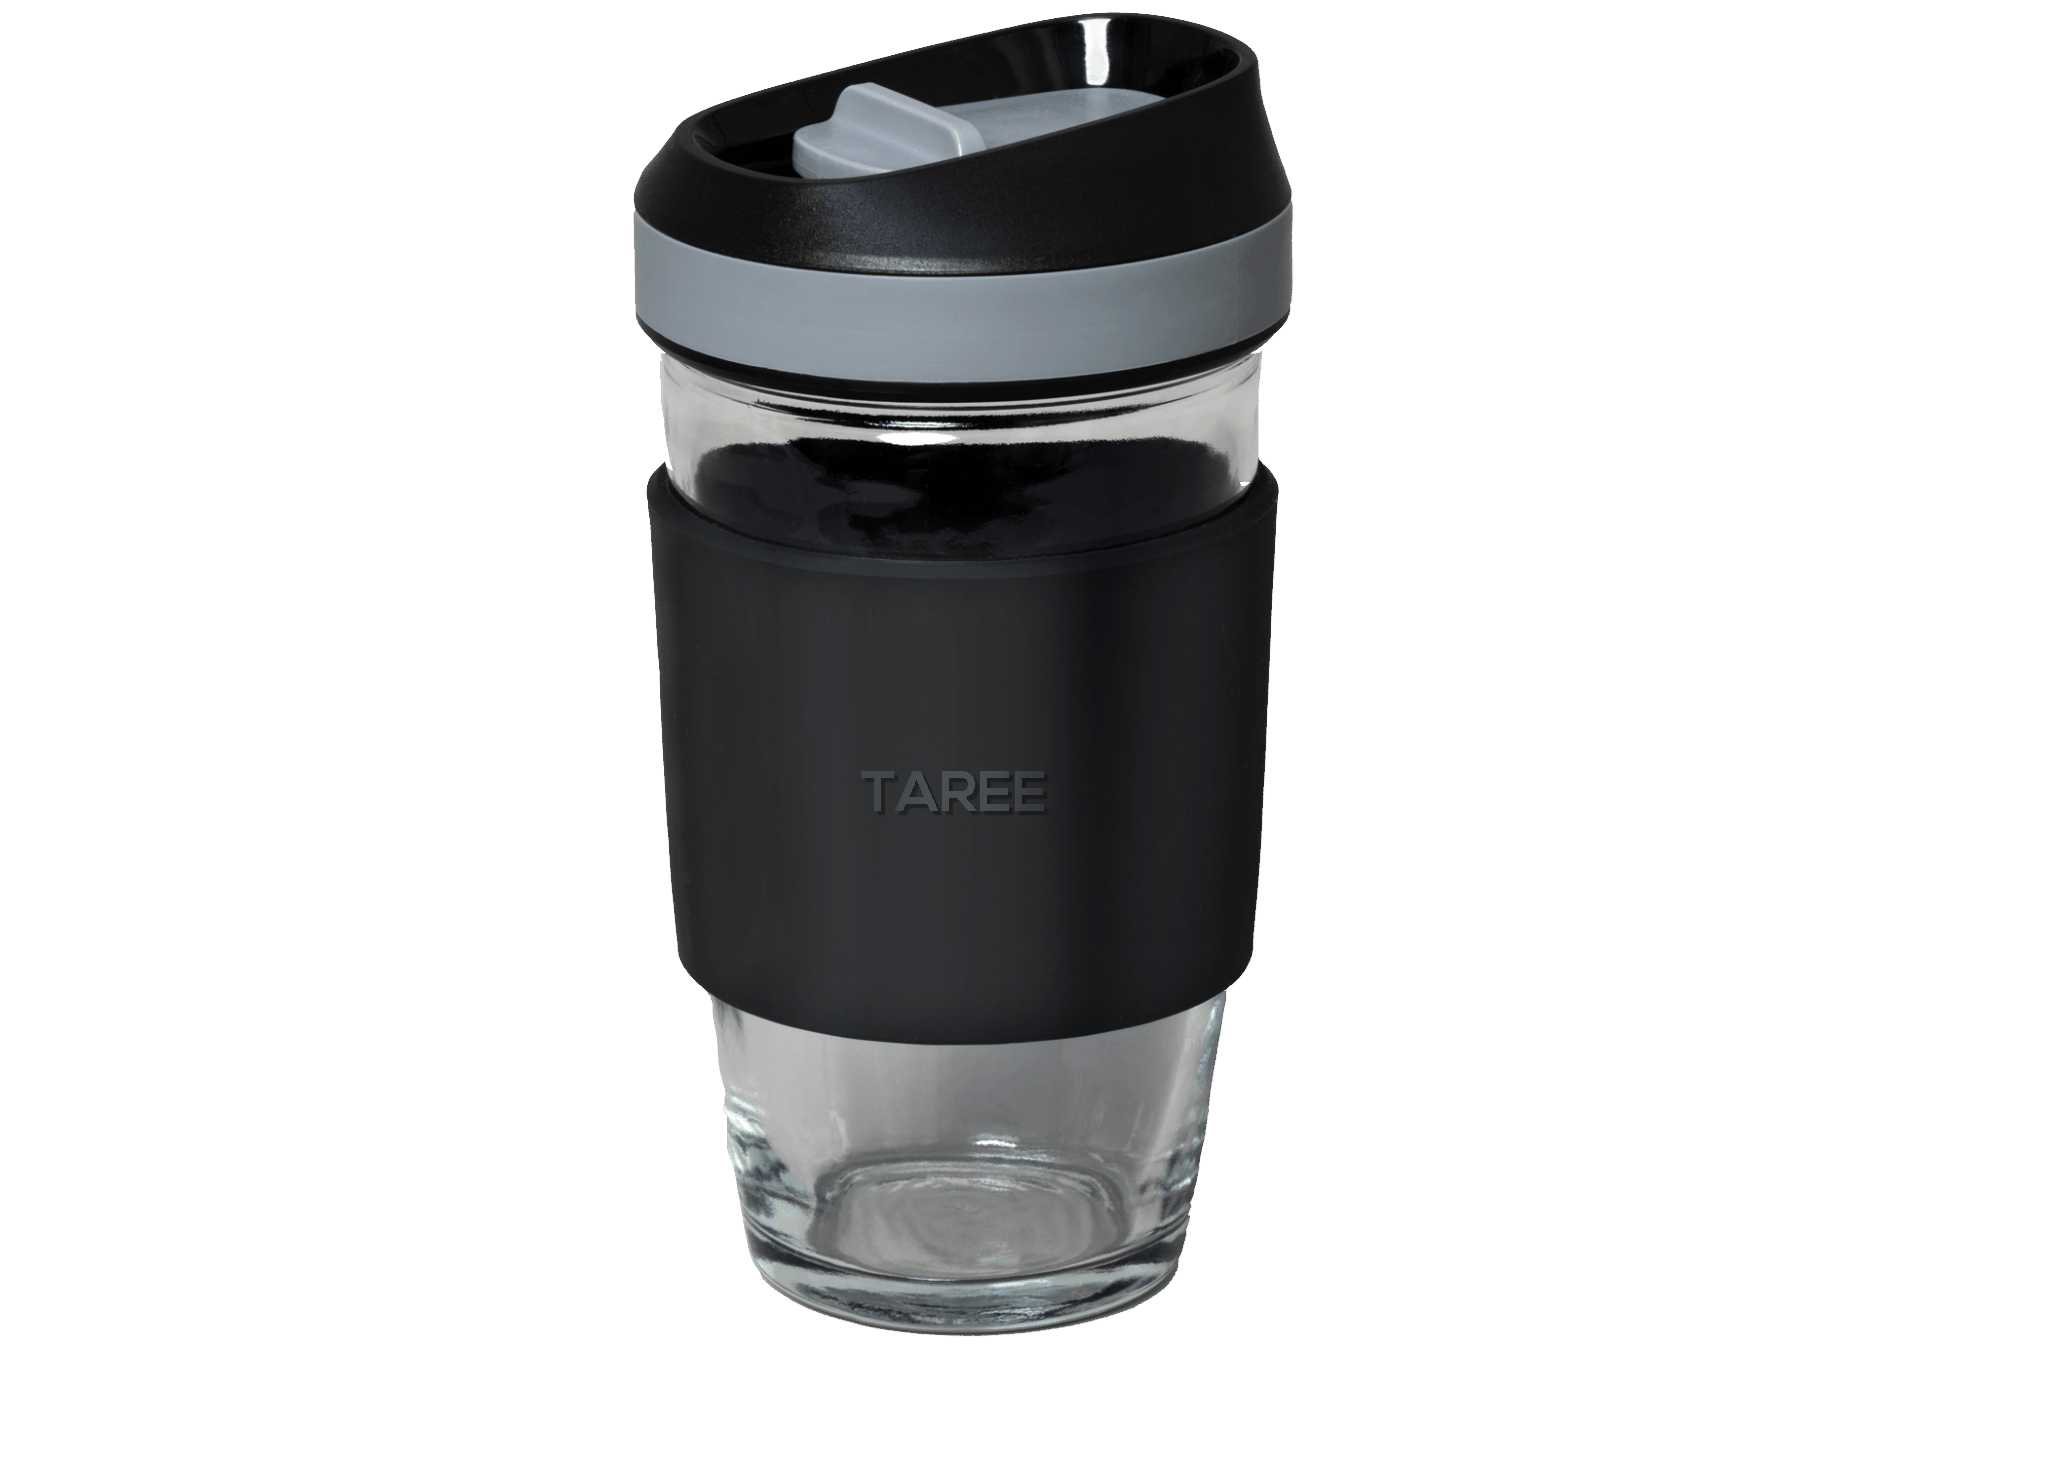 Terrano  Hermetic Screw Cap Thermal Coffee Mug with Silicone Grip